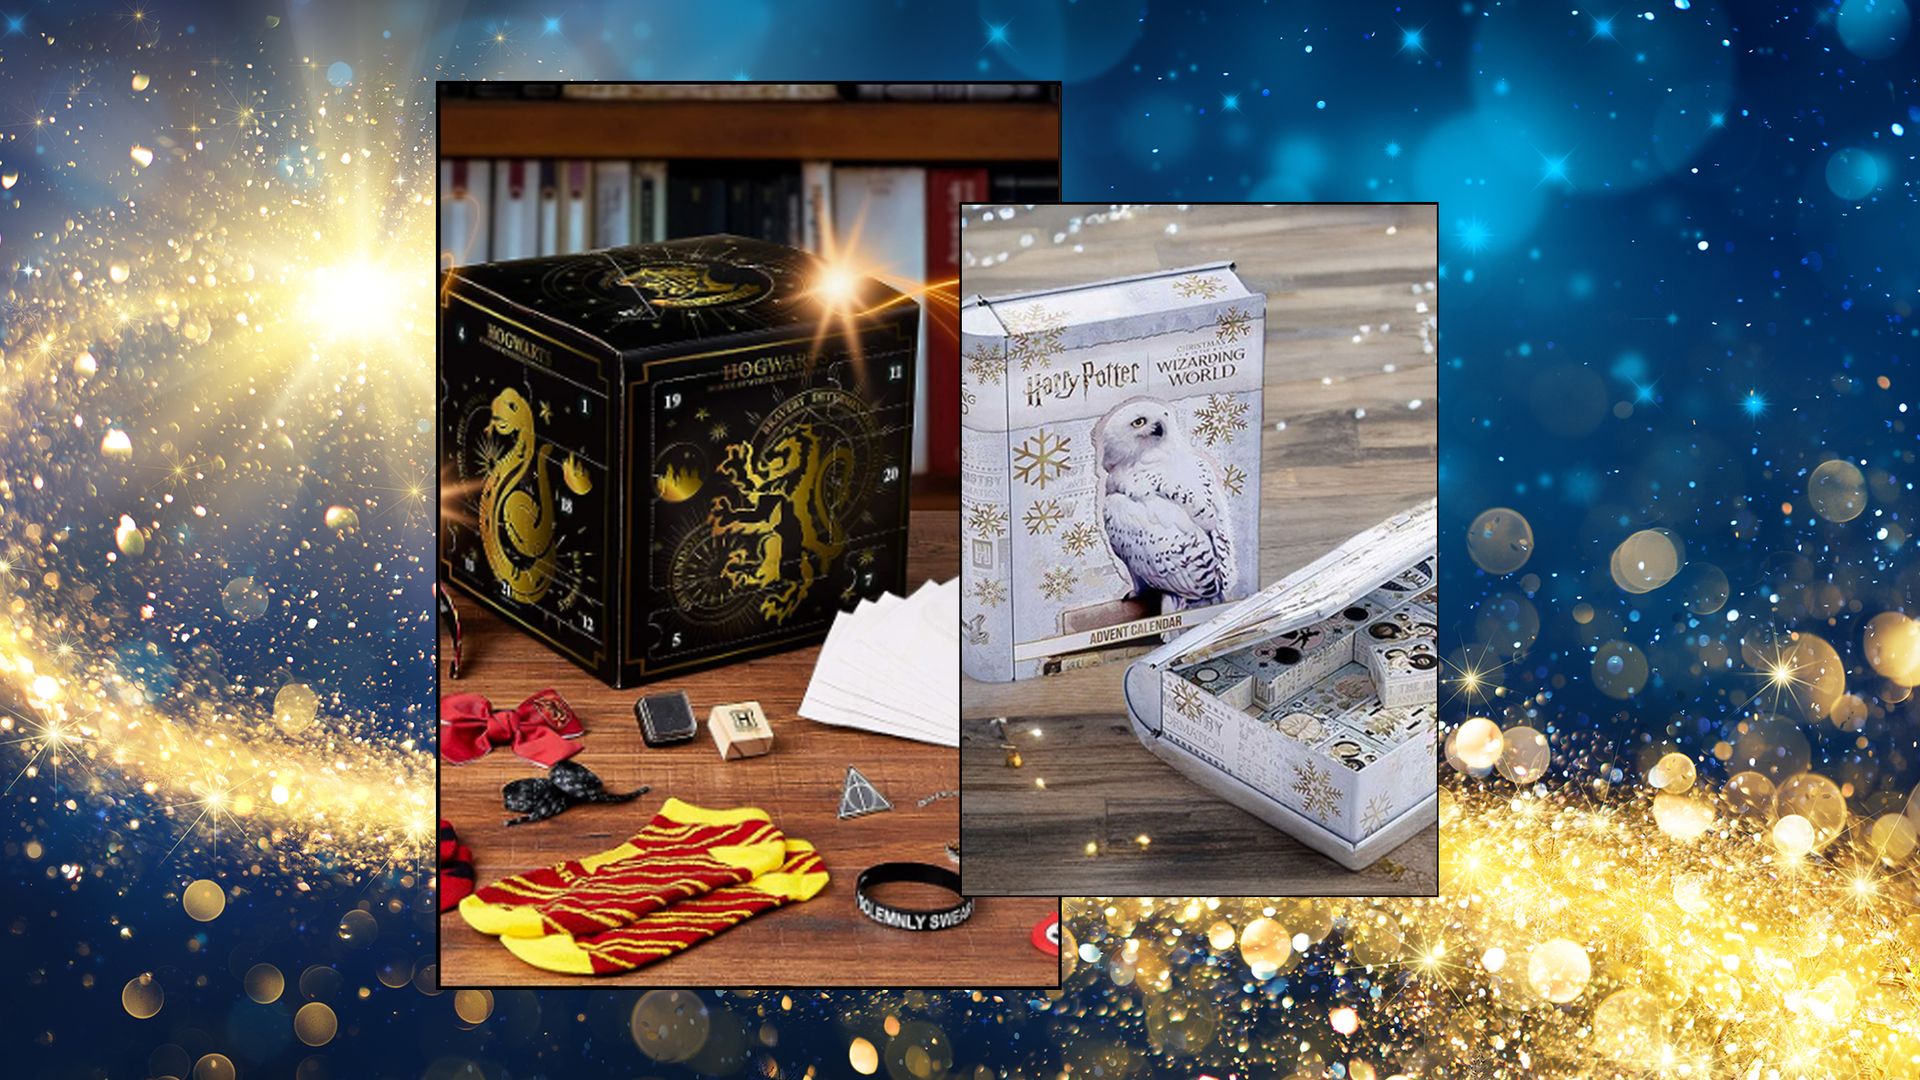 How To Buy the Boots Harry Potter Advent Calendar for 2023